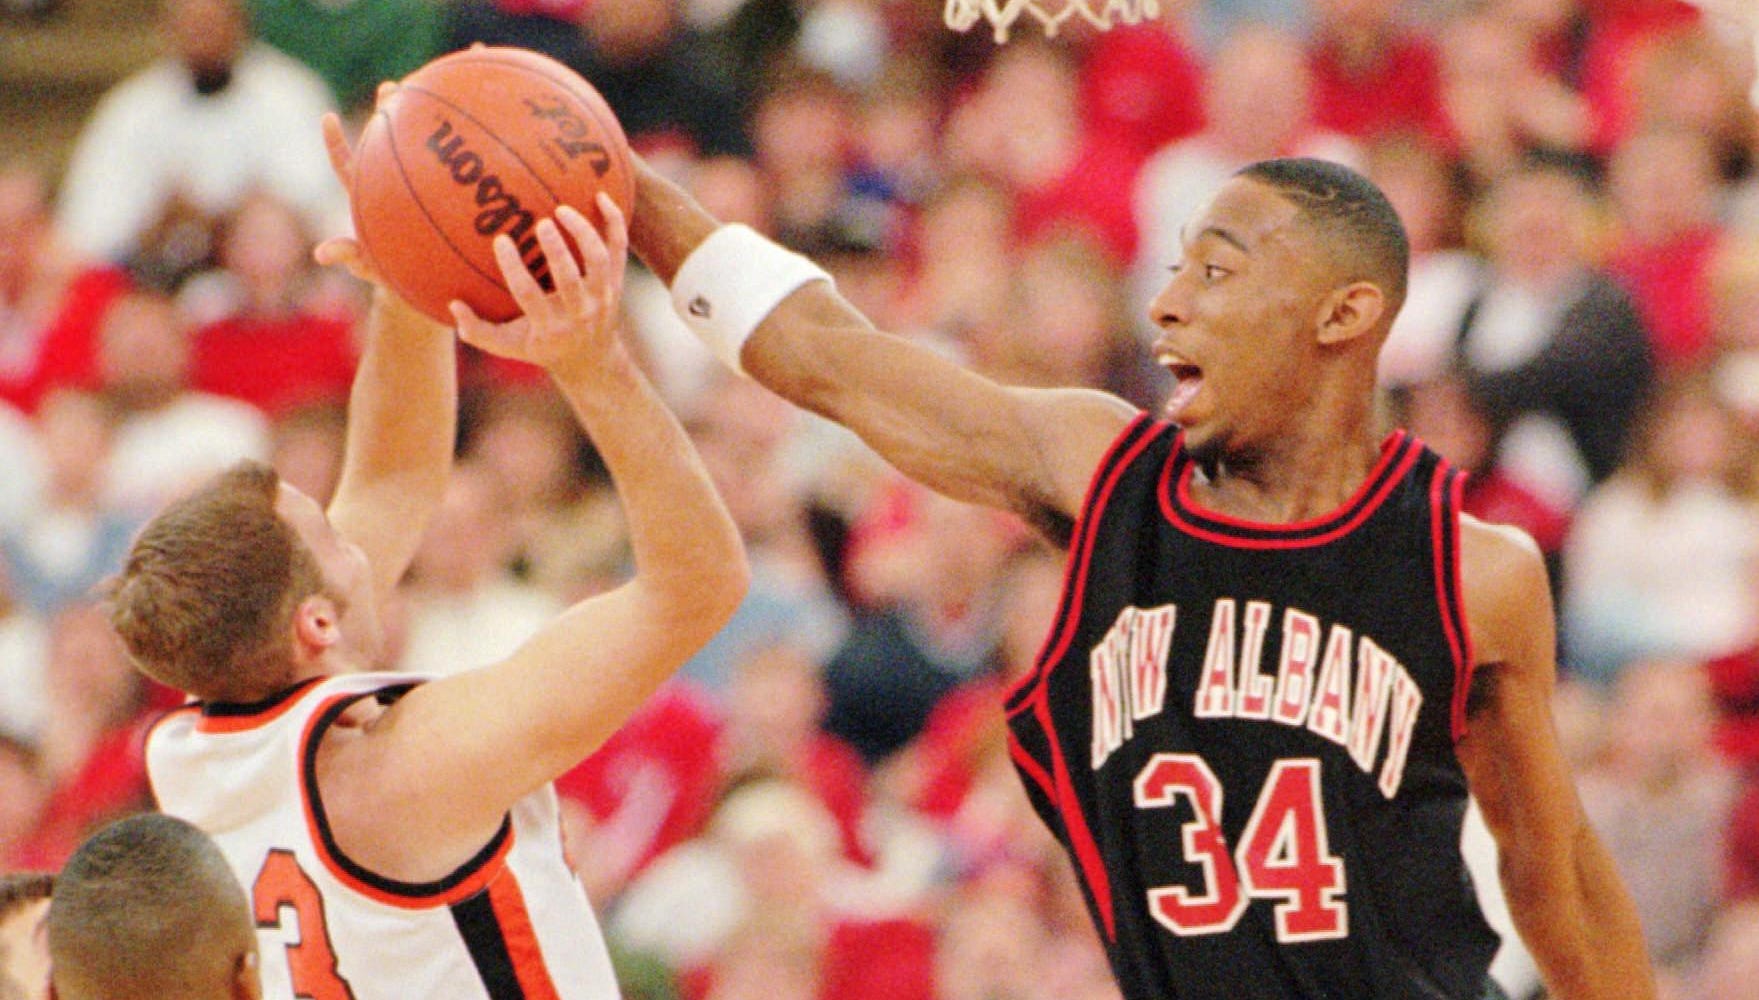 Indiana basketball: New Albany best players in history